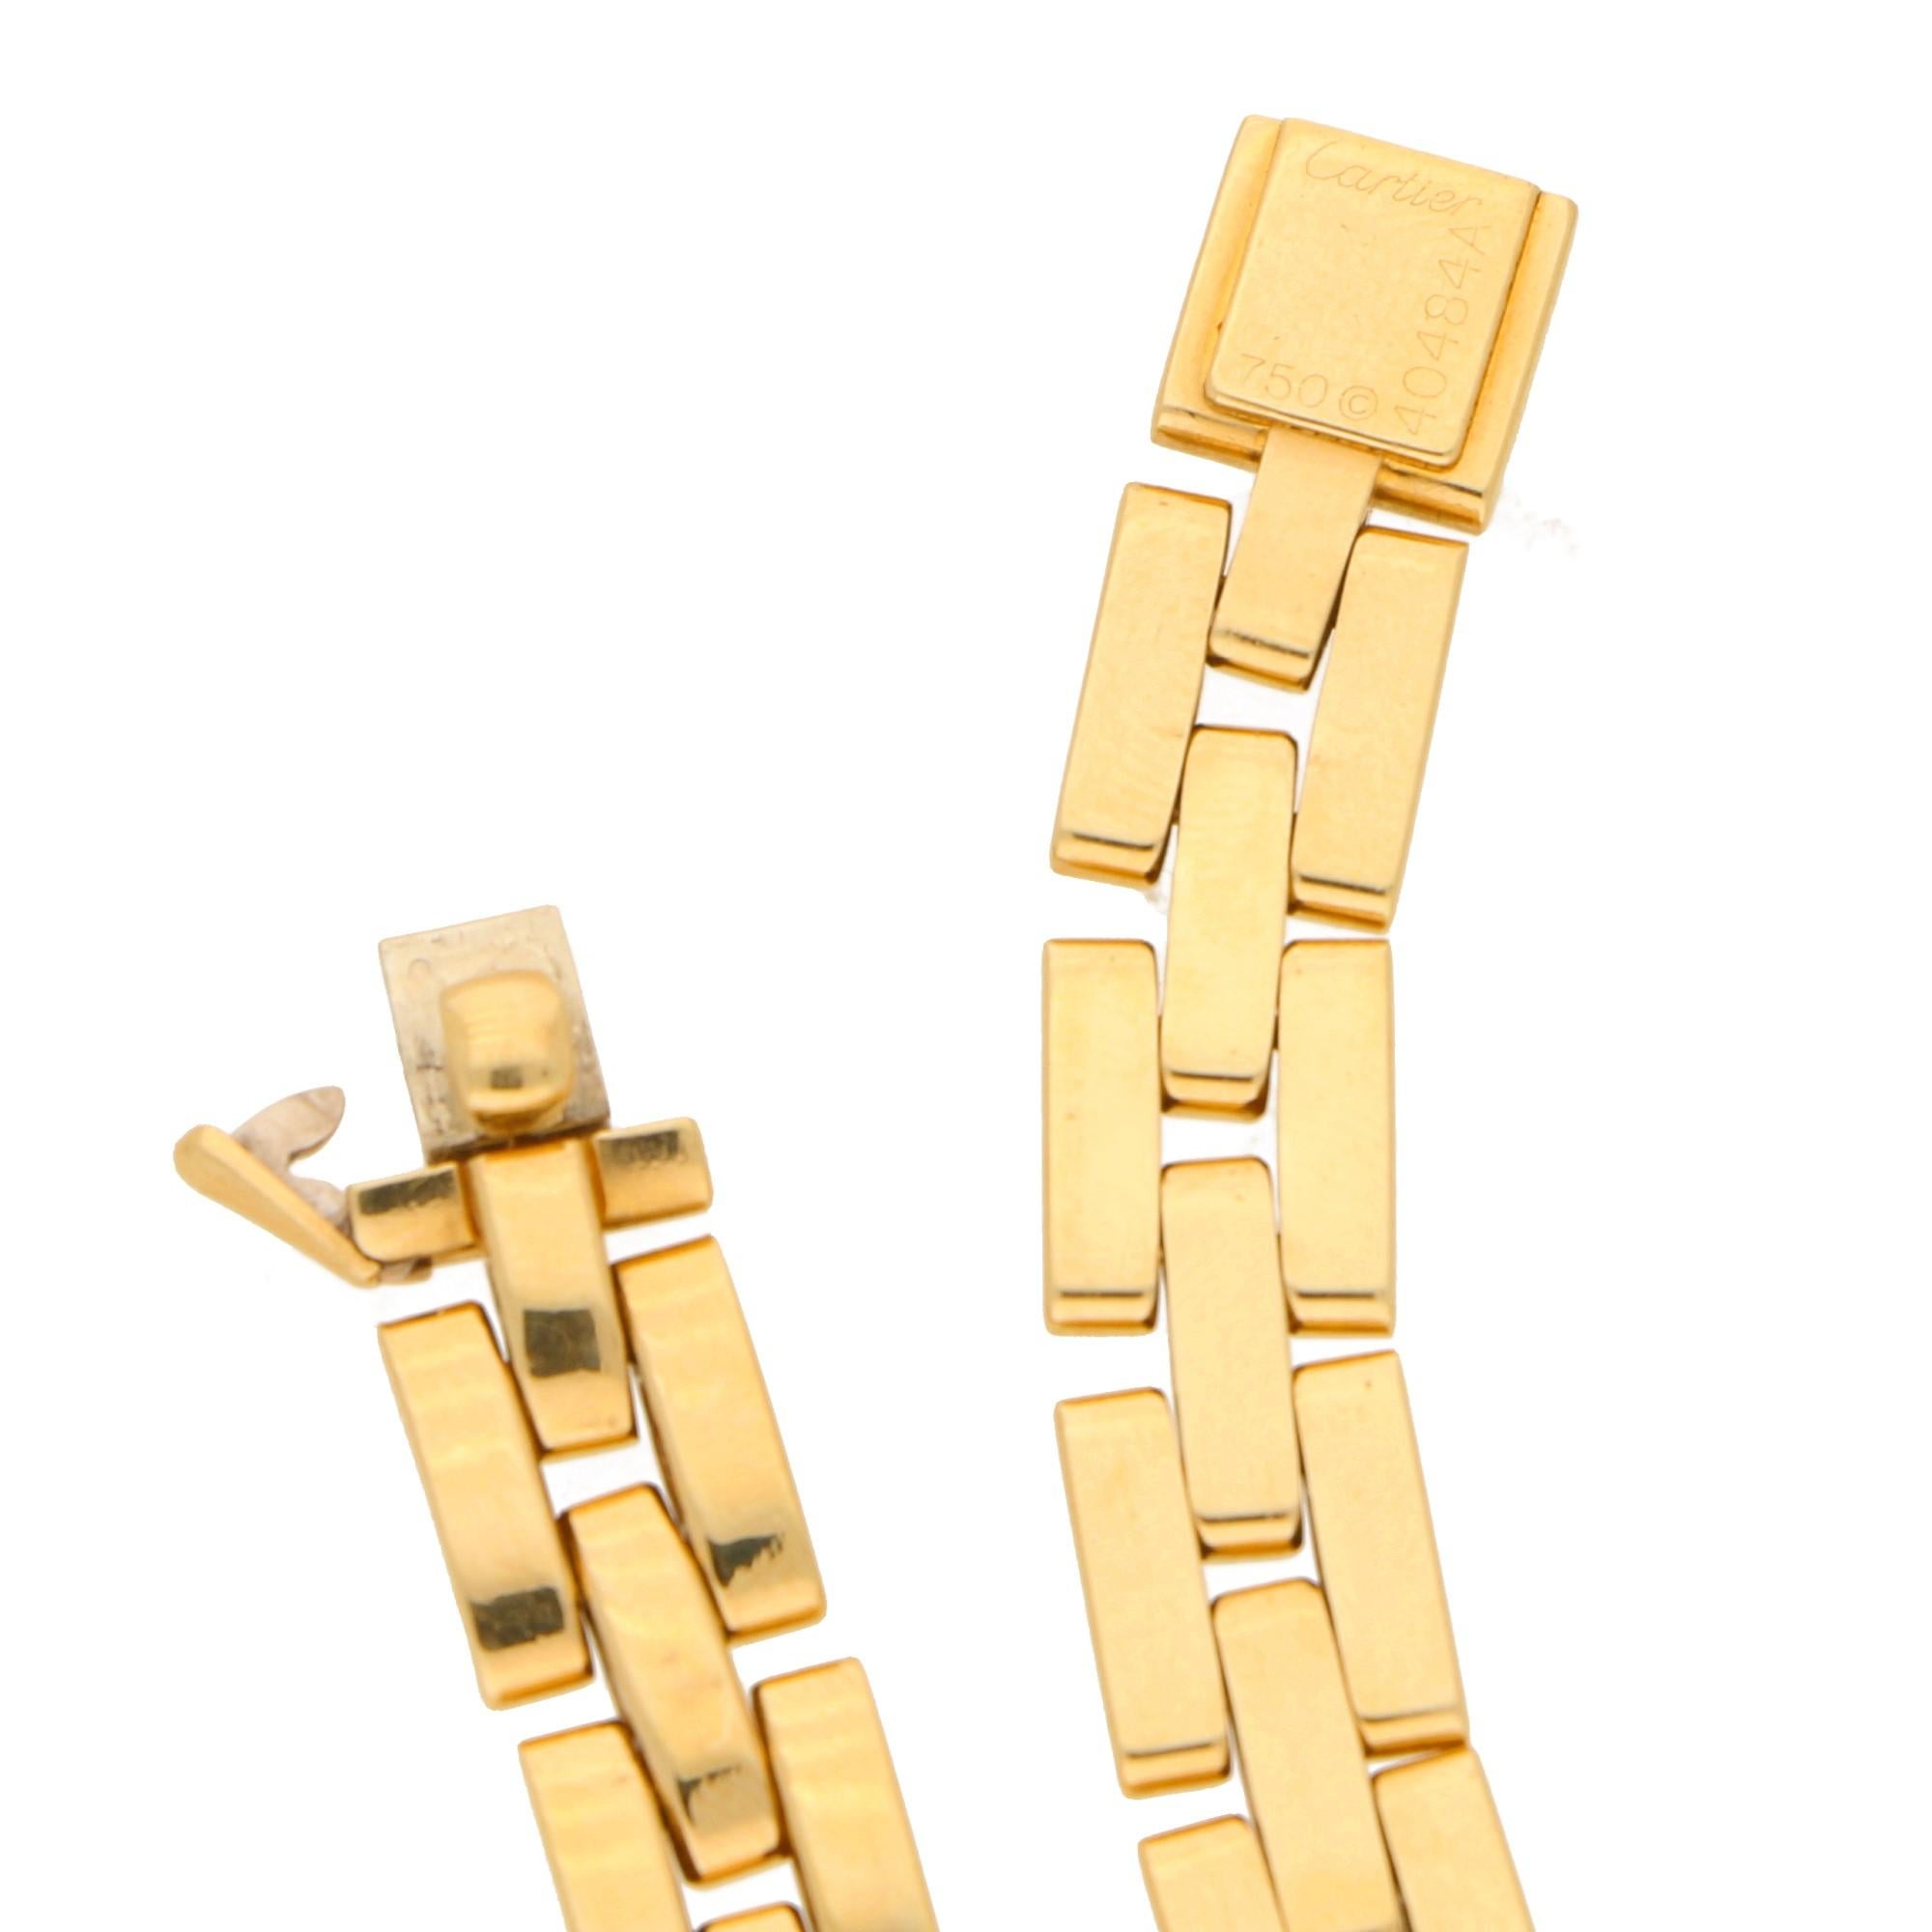 A Cartier Maillon Panthere bracelet in 18-karat yellow gold. This bracelet from the iconic Maillon Panthere collection is designed as three rows of polished yellow gold half-barrel-shaped links, to a doubly-secure click-shut and safety catch